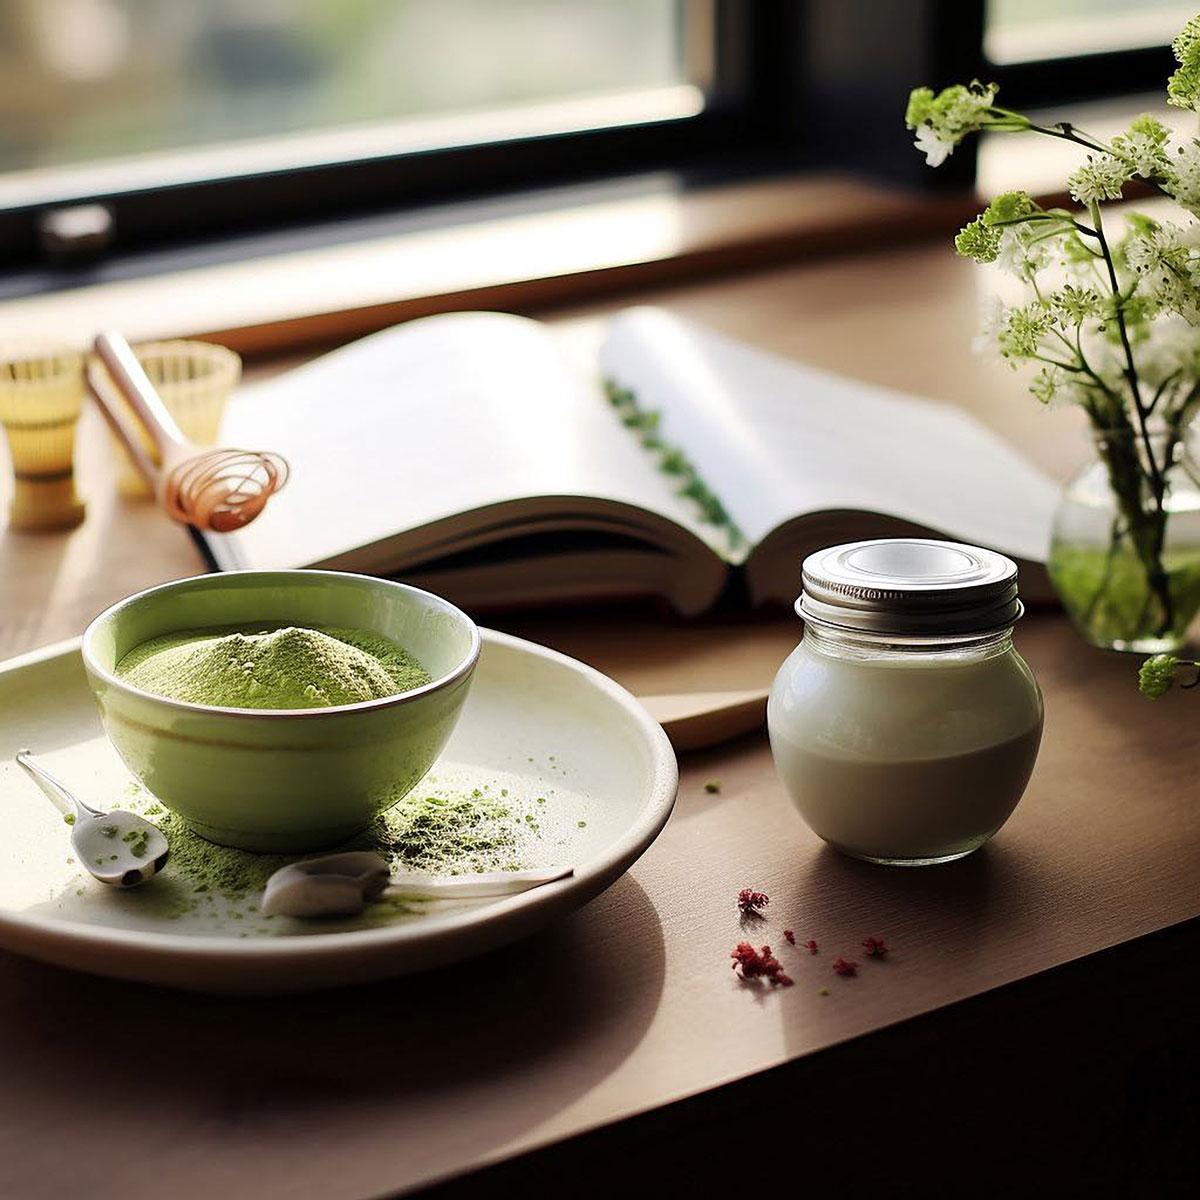 Best Dinner Recipes to Boost Your Immune System with Matcha